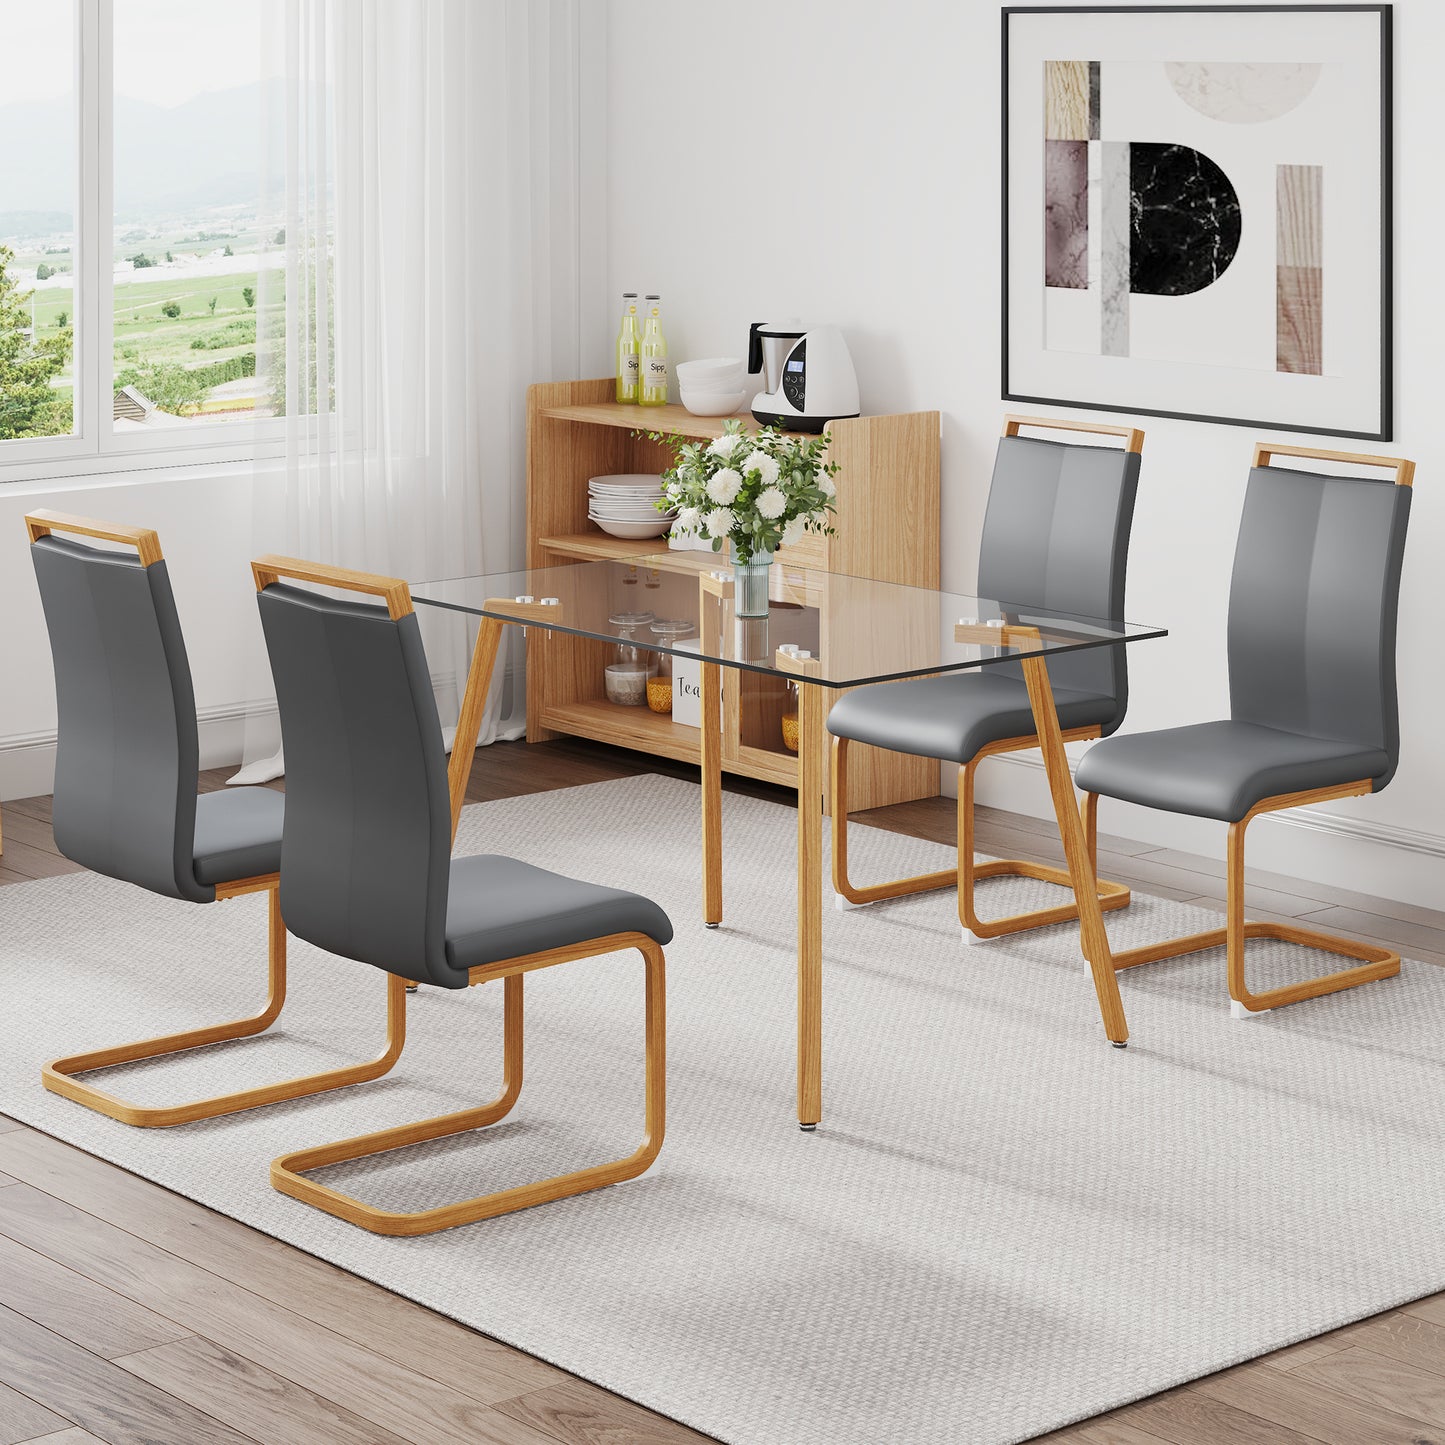 Table and chair set. 1 table and 4 grey chairs. Glass dining table with 0.31 "tempered glass tabletop and wood color metal legs. PU leather high back upholstered chair with wood color metal leg